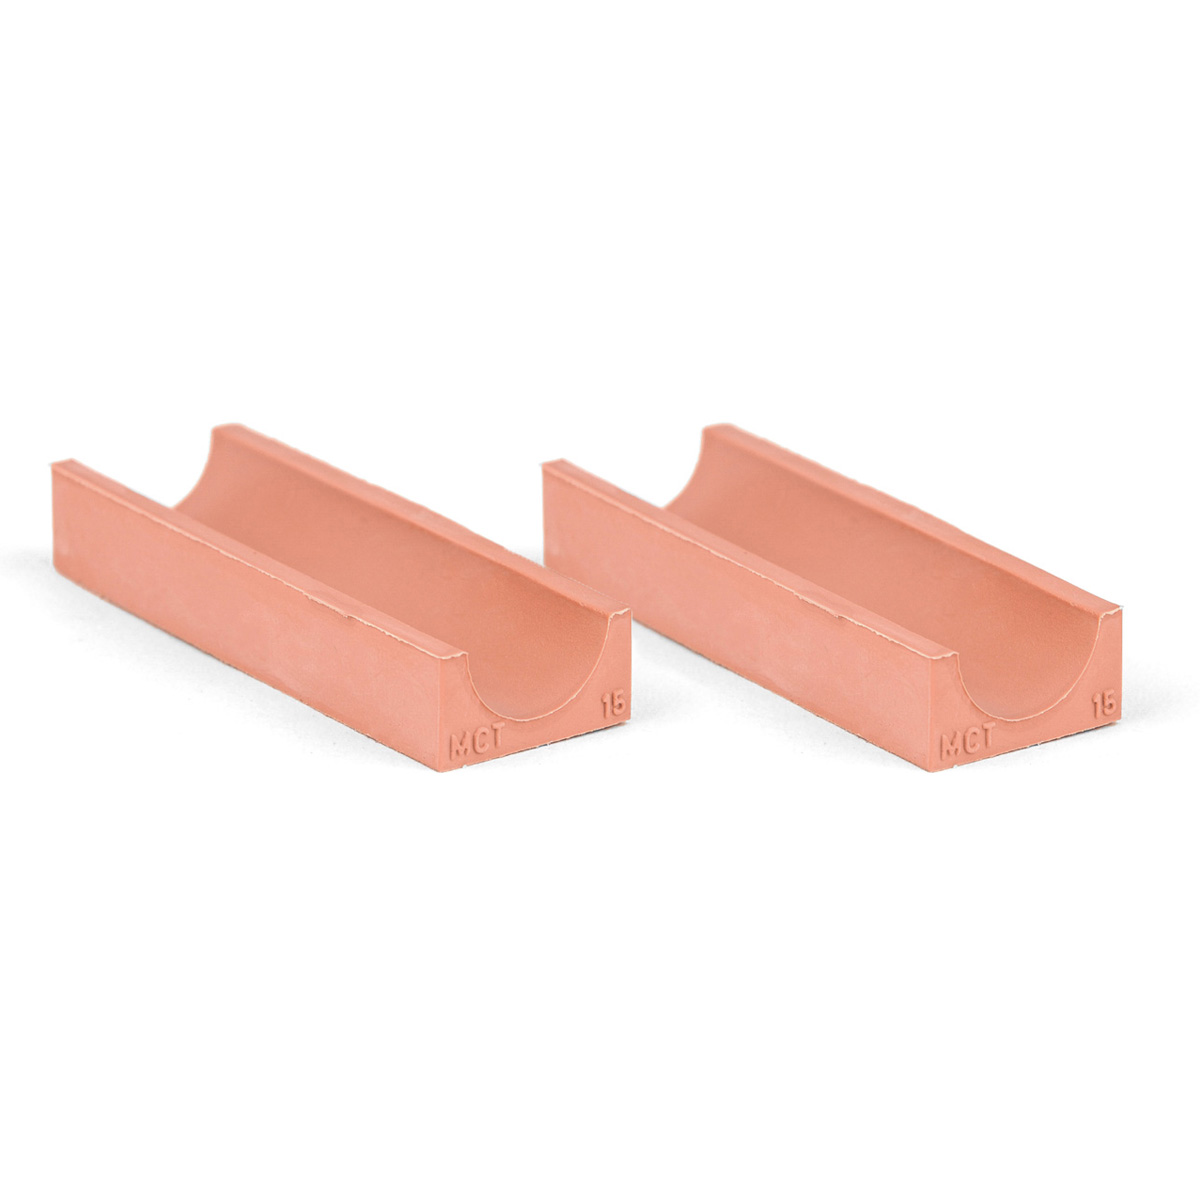 20-15*2 Set of 2 half insert block lycron 30mm, 20-15 for cable/pipe diam. 14.5-15.5mm